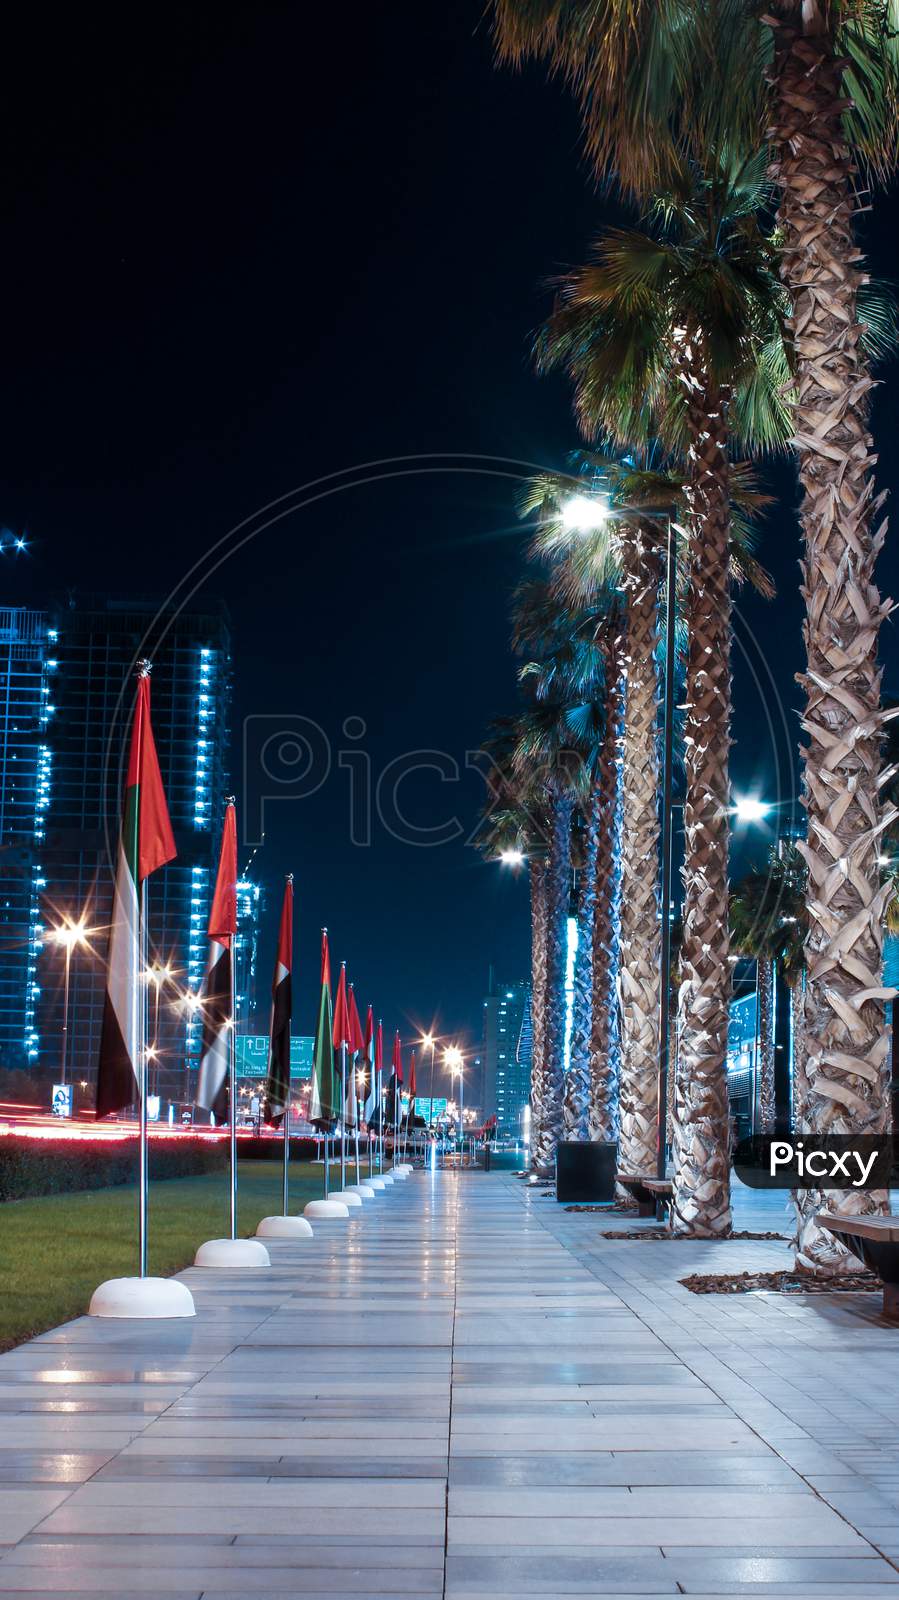 A Symmetrical Long Exposure Photo Of UAE Flags And Palm Trees Alongside A Road And Garden In Downtown Dubai, United Arab Emirates.